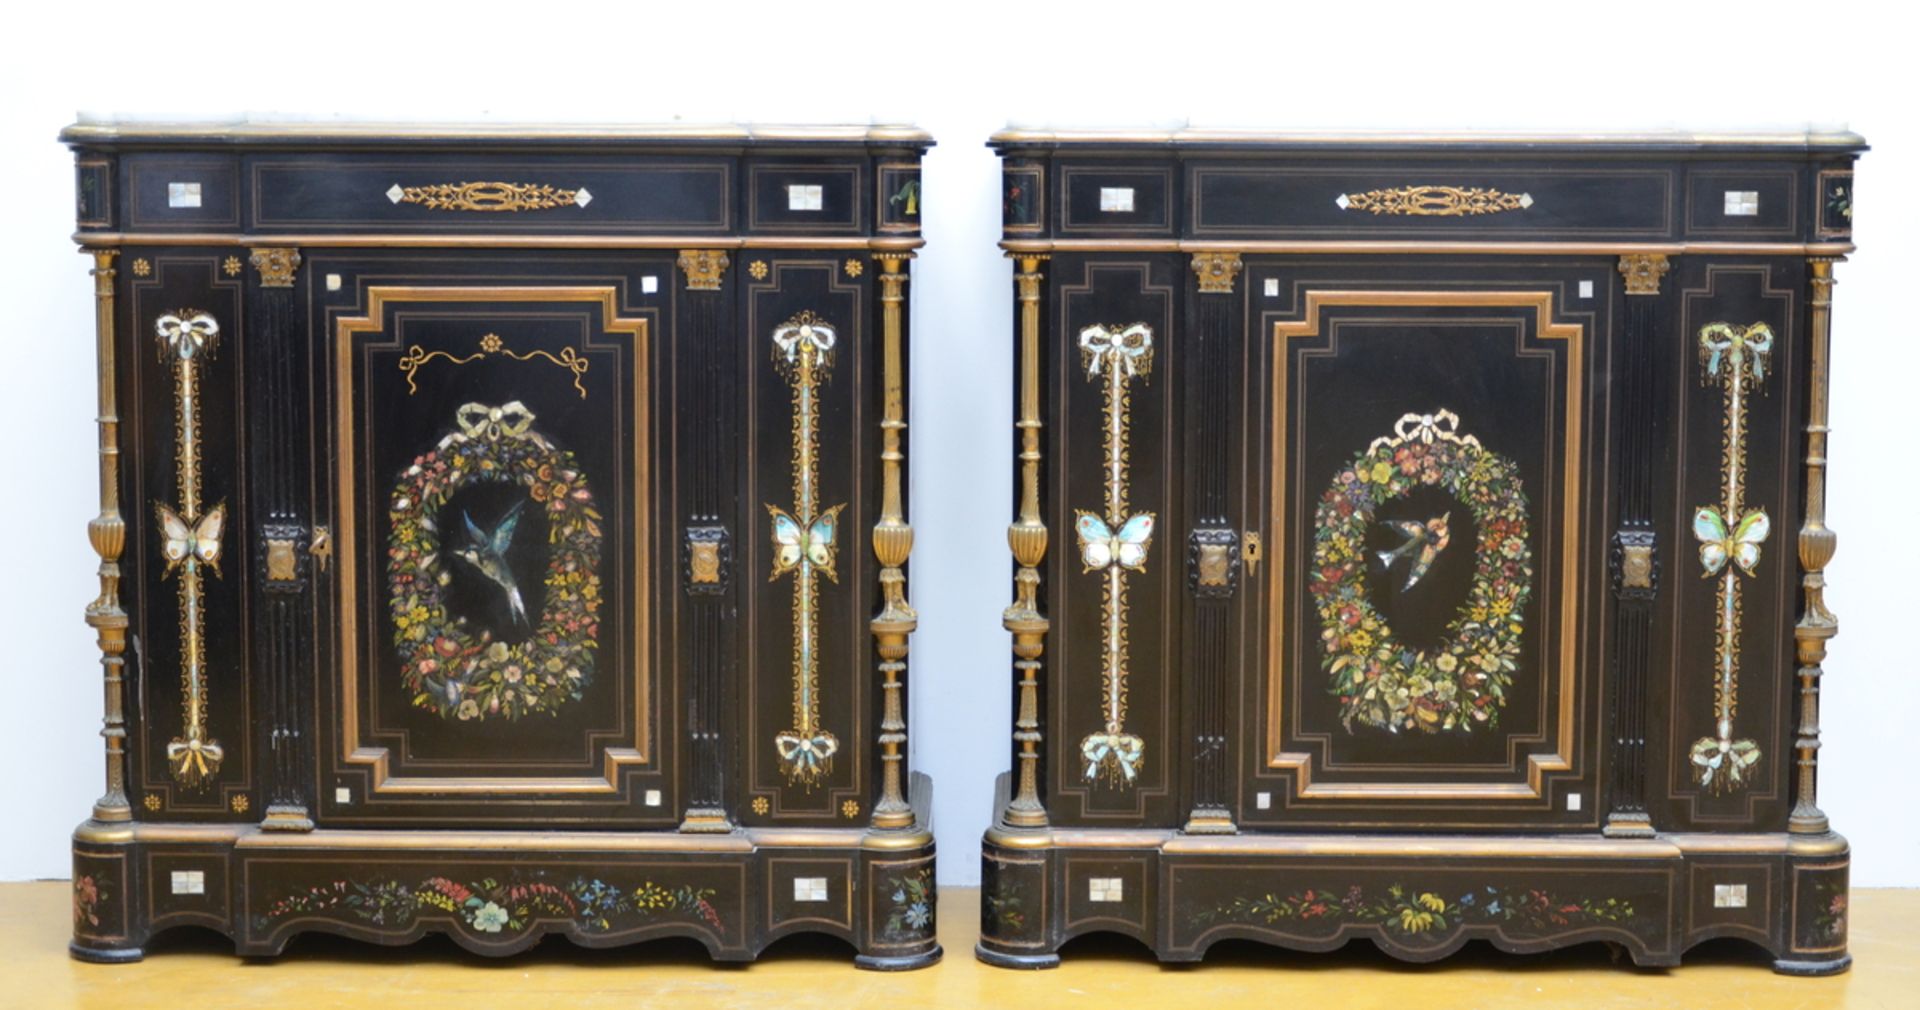 A pair of Napoleon III sideboards with painting and mother-of-pearl inlay (110x110x45)